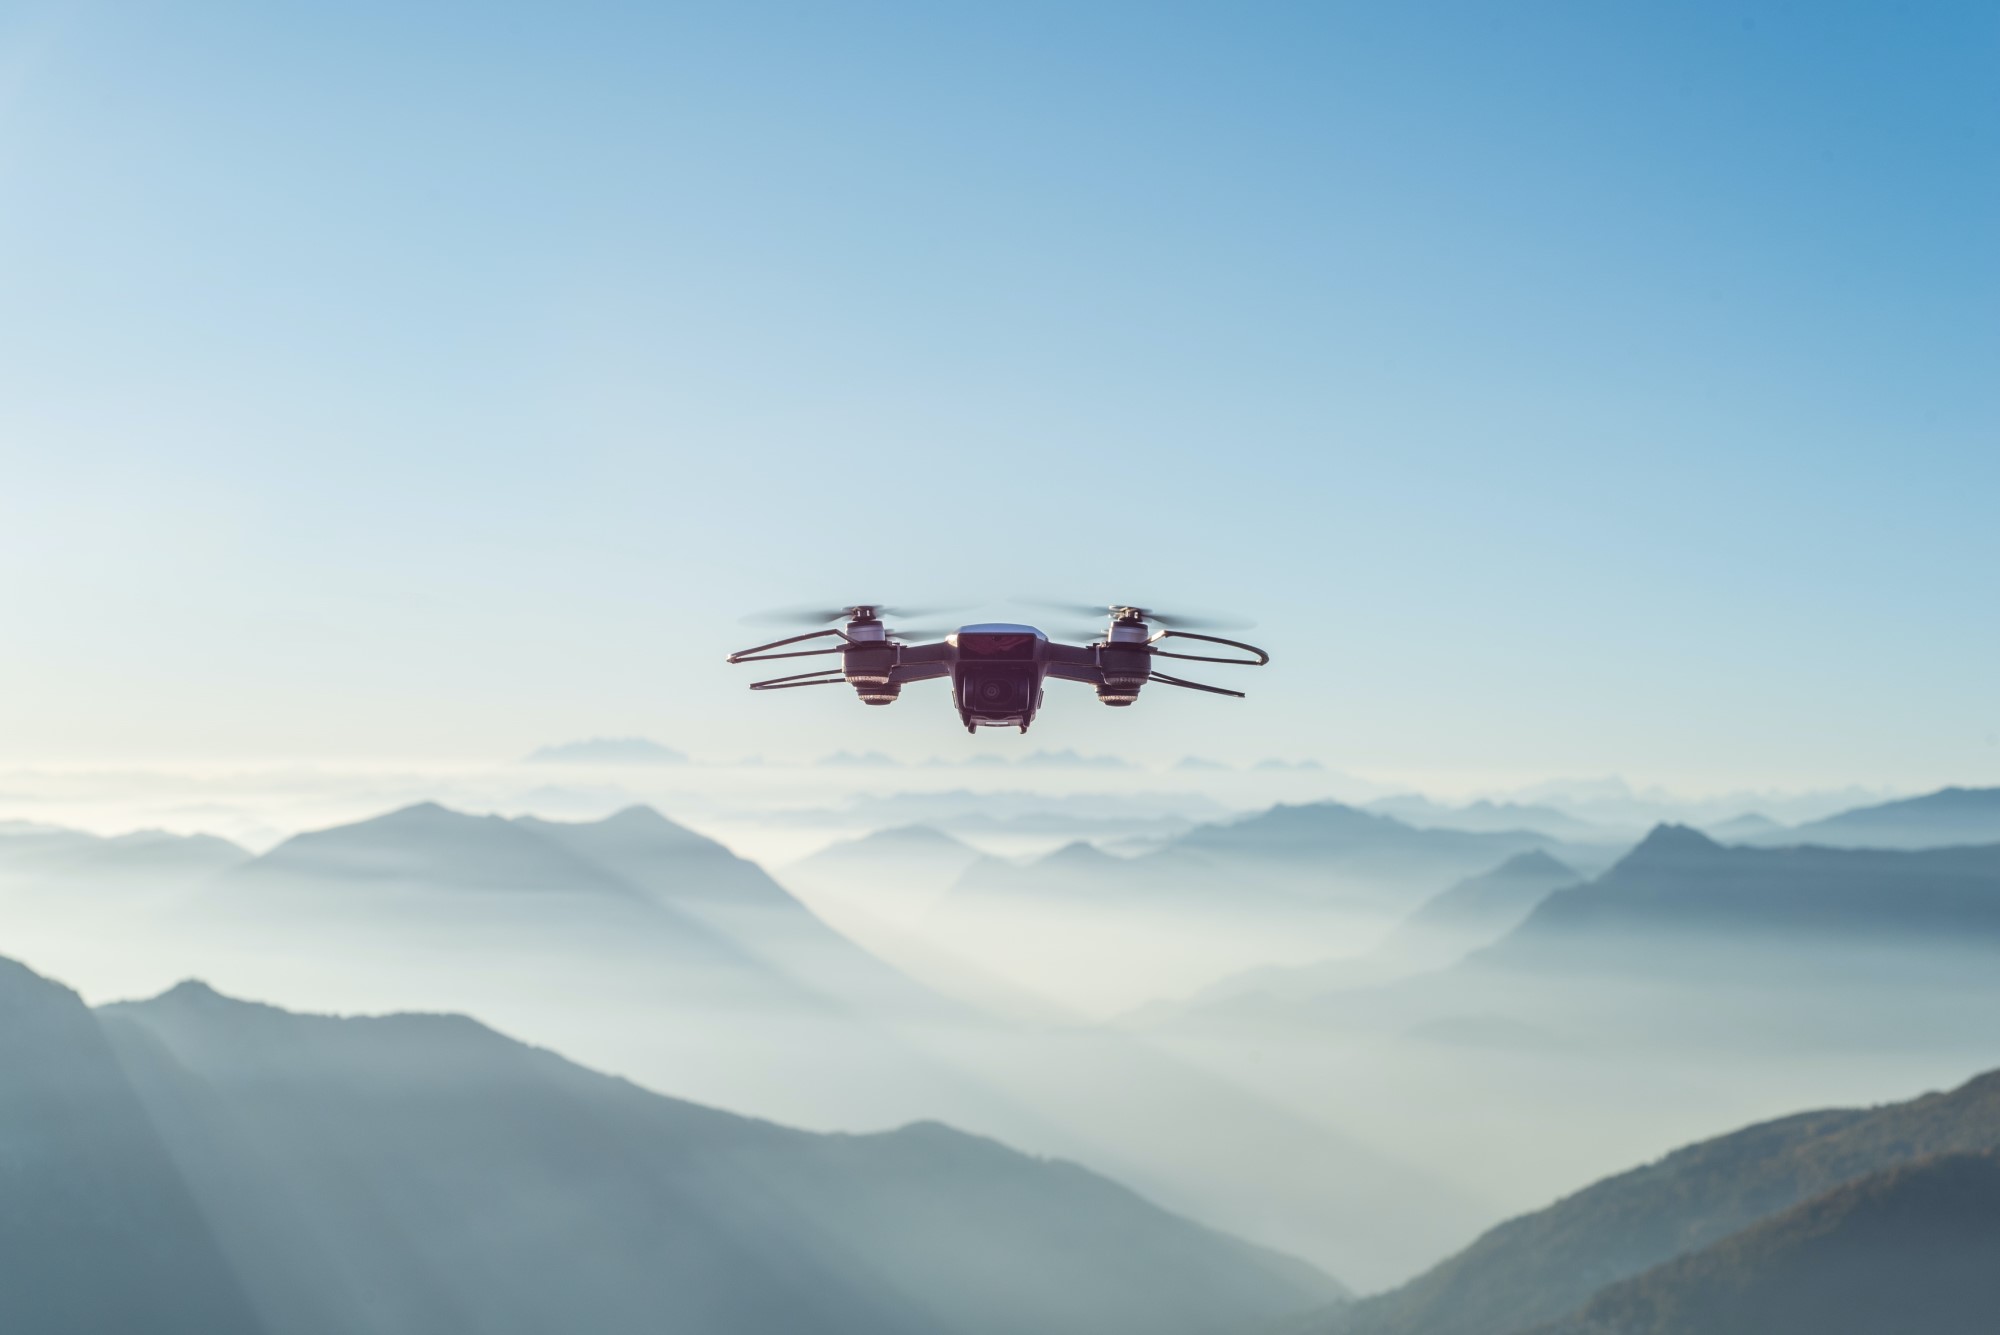 Image of drone floating above mountains in daylight.